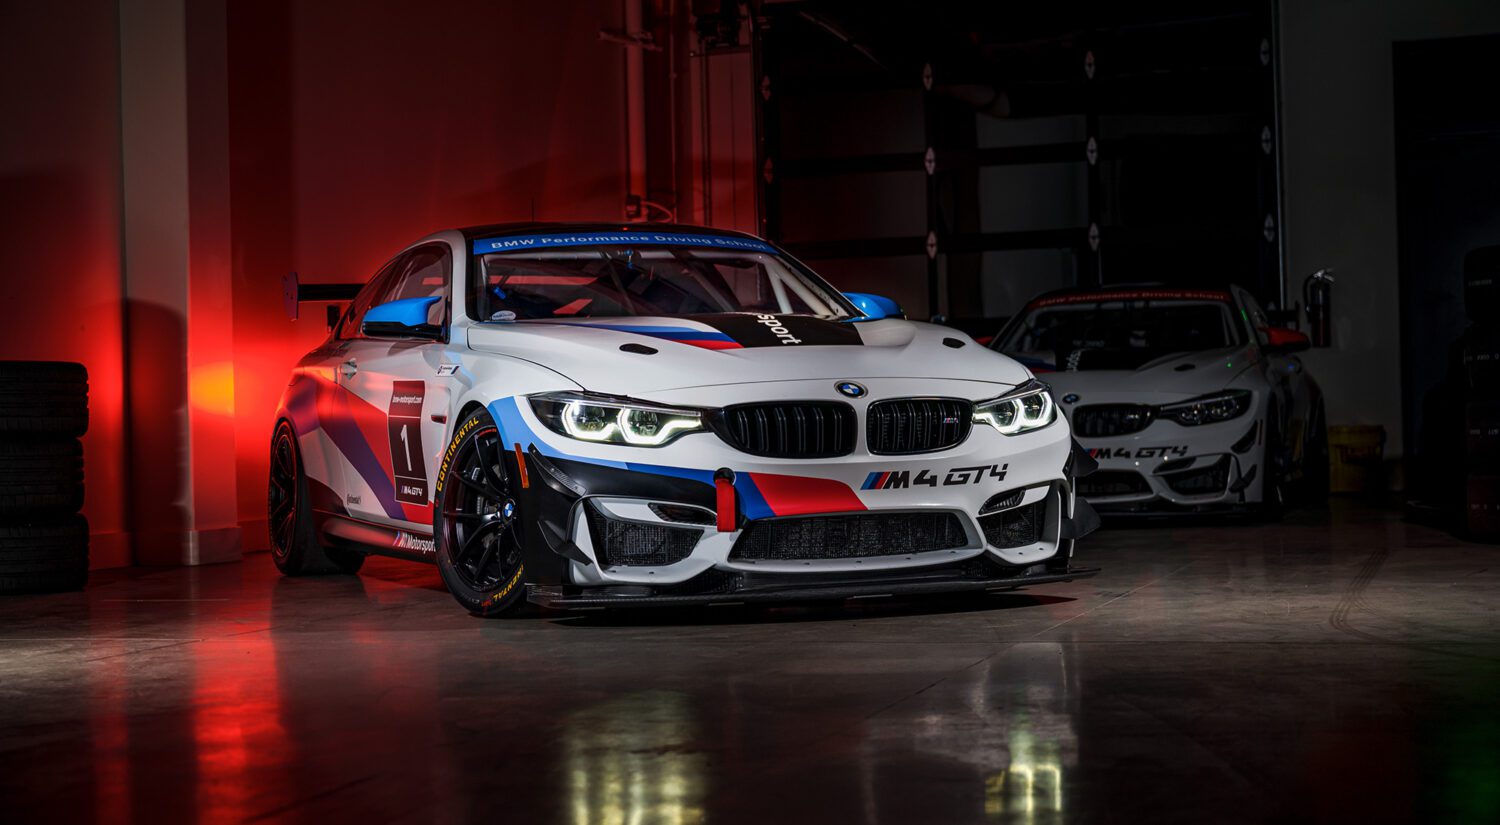 More Four: A tour of the BMW M4 GT4